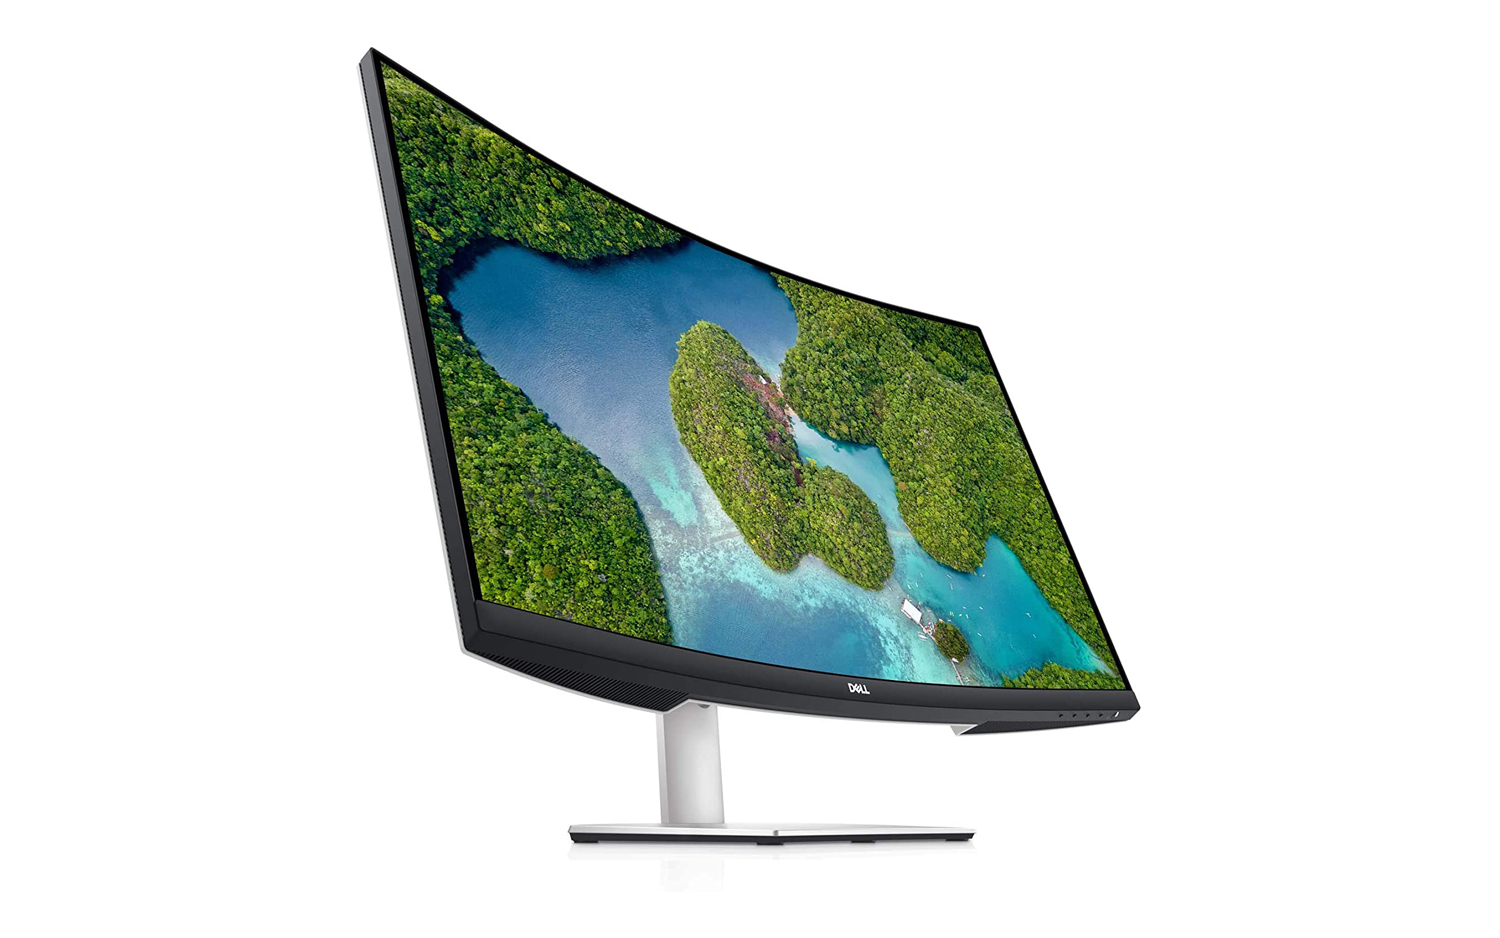 The Dell 4K S3221QS Curved Monitor boasts a deep 1800R curvature for an even more immersive experience.